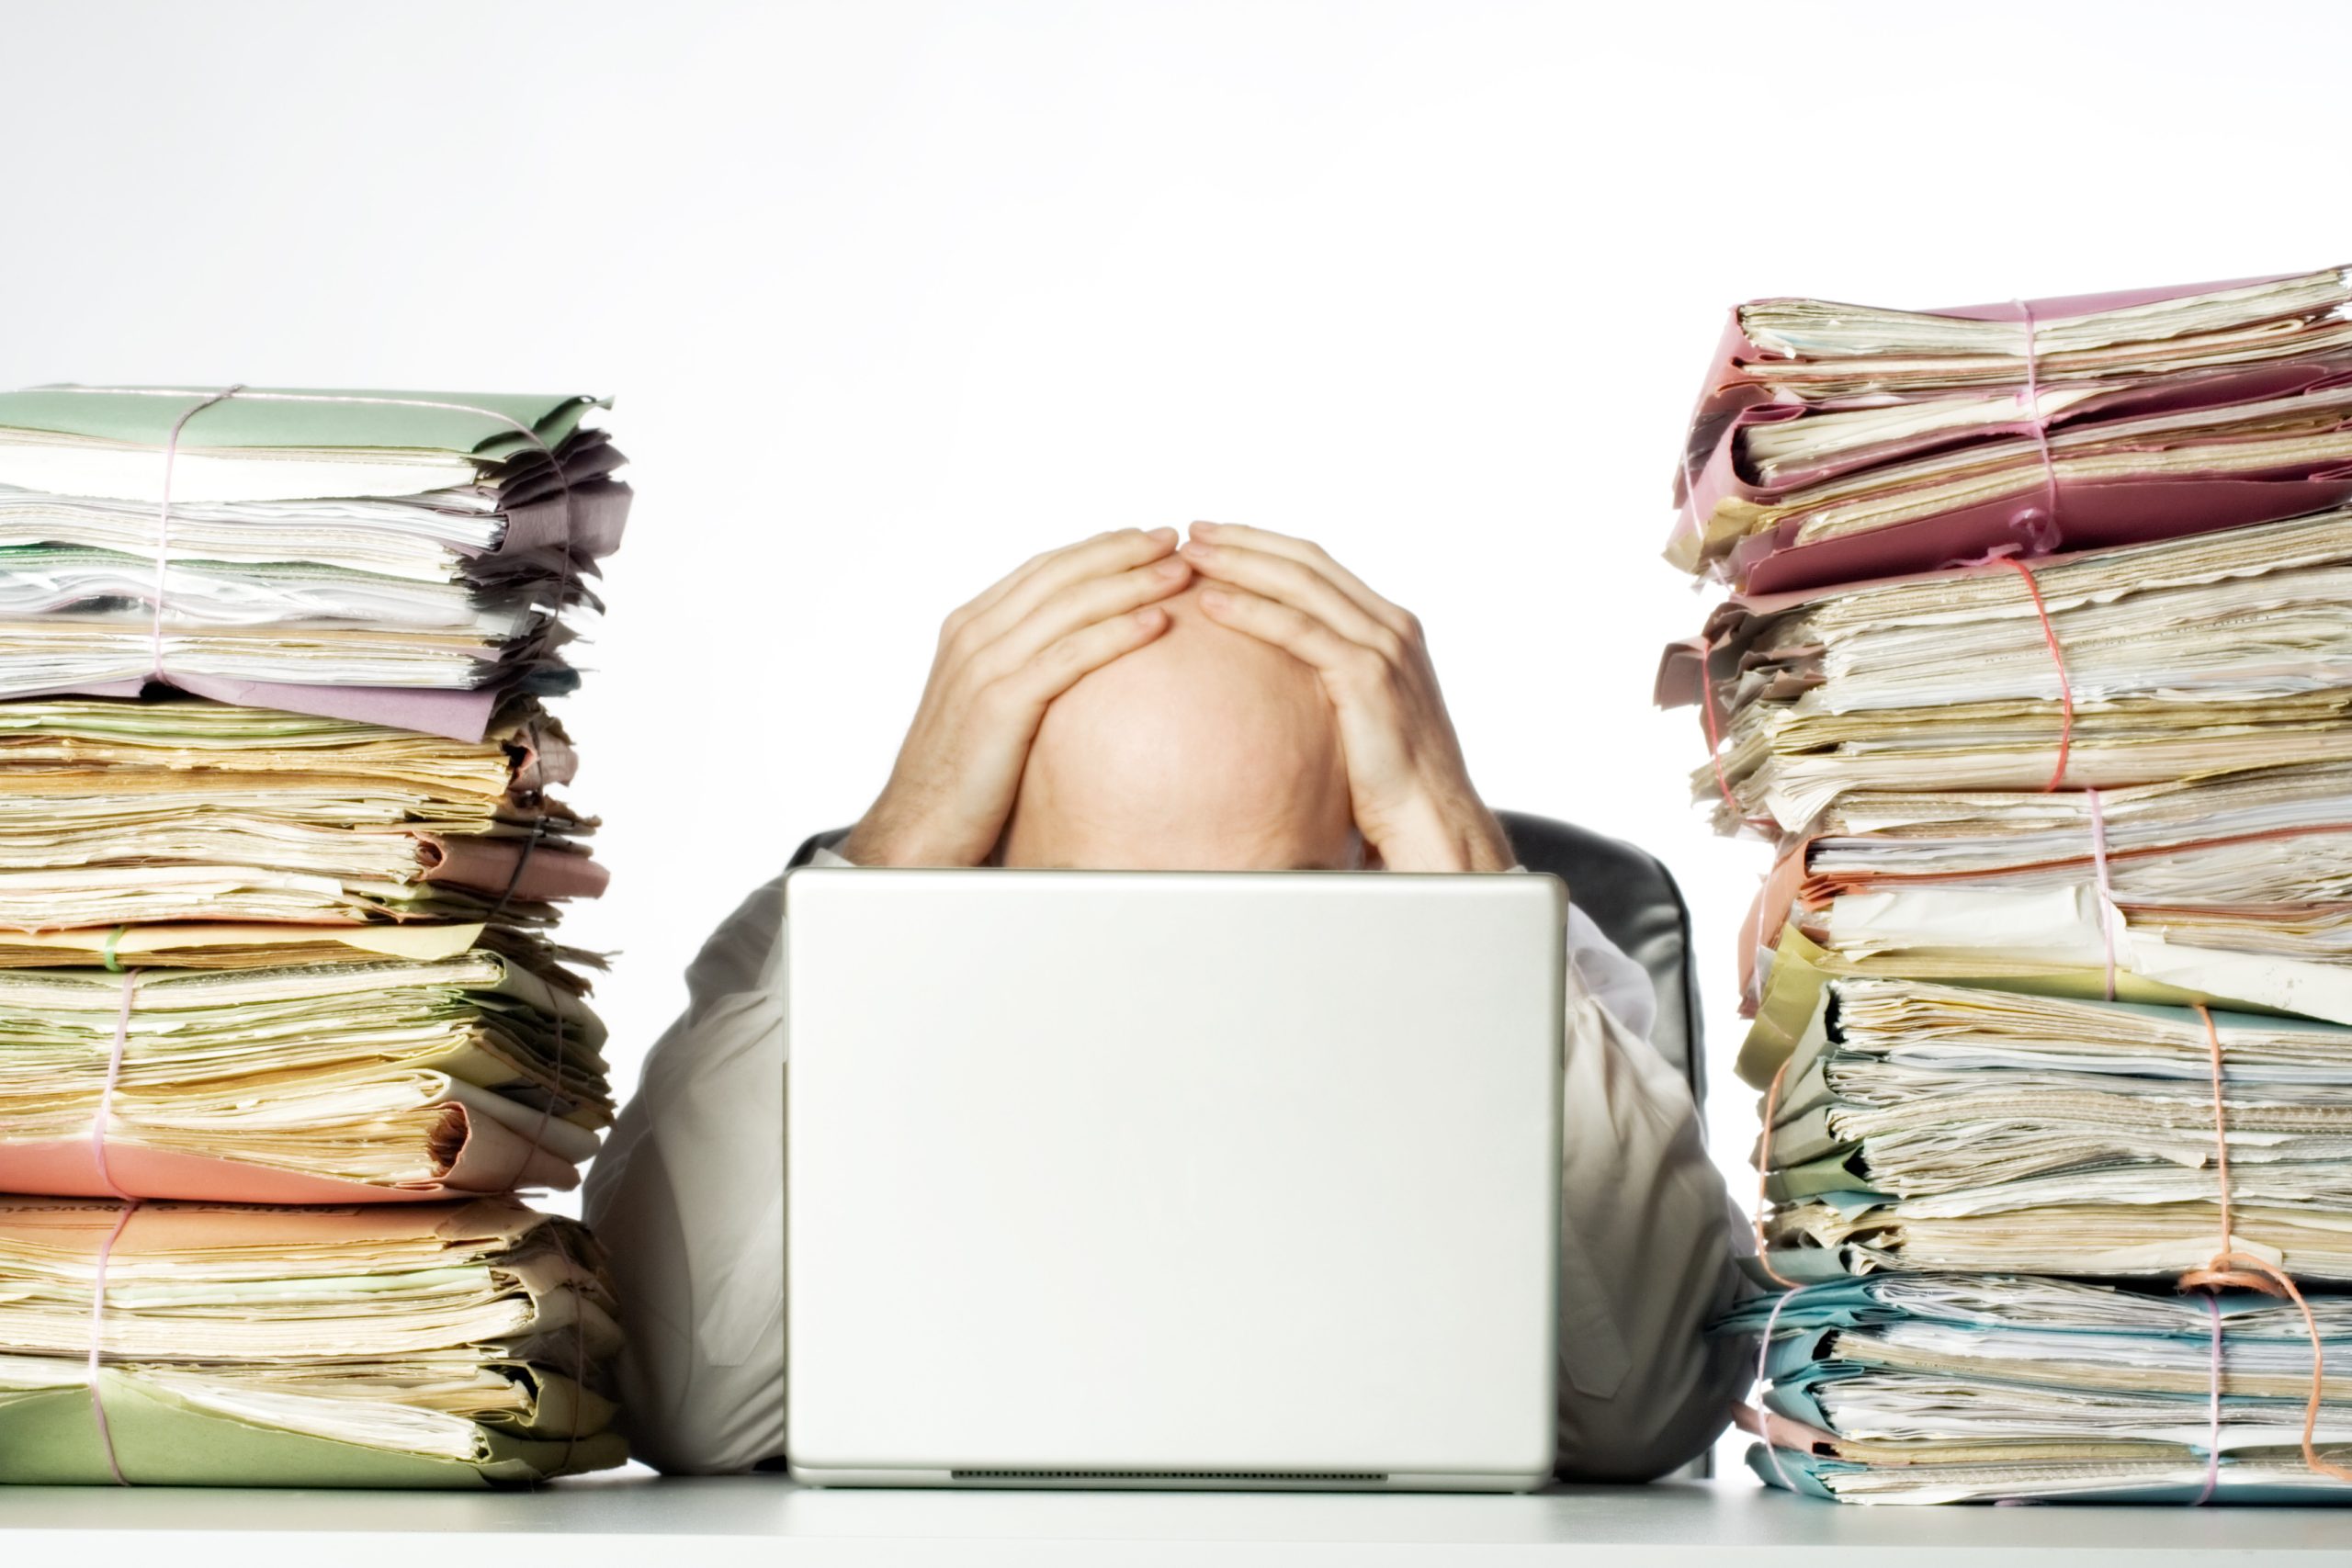 Male businessman sitting behind a laptop, his face hidden, with his hands on top of his head. Two large piles of paperwork are piled on each side of the model, towering over his head. Isolated on white background.